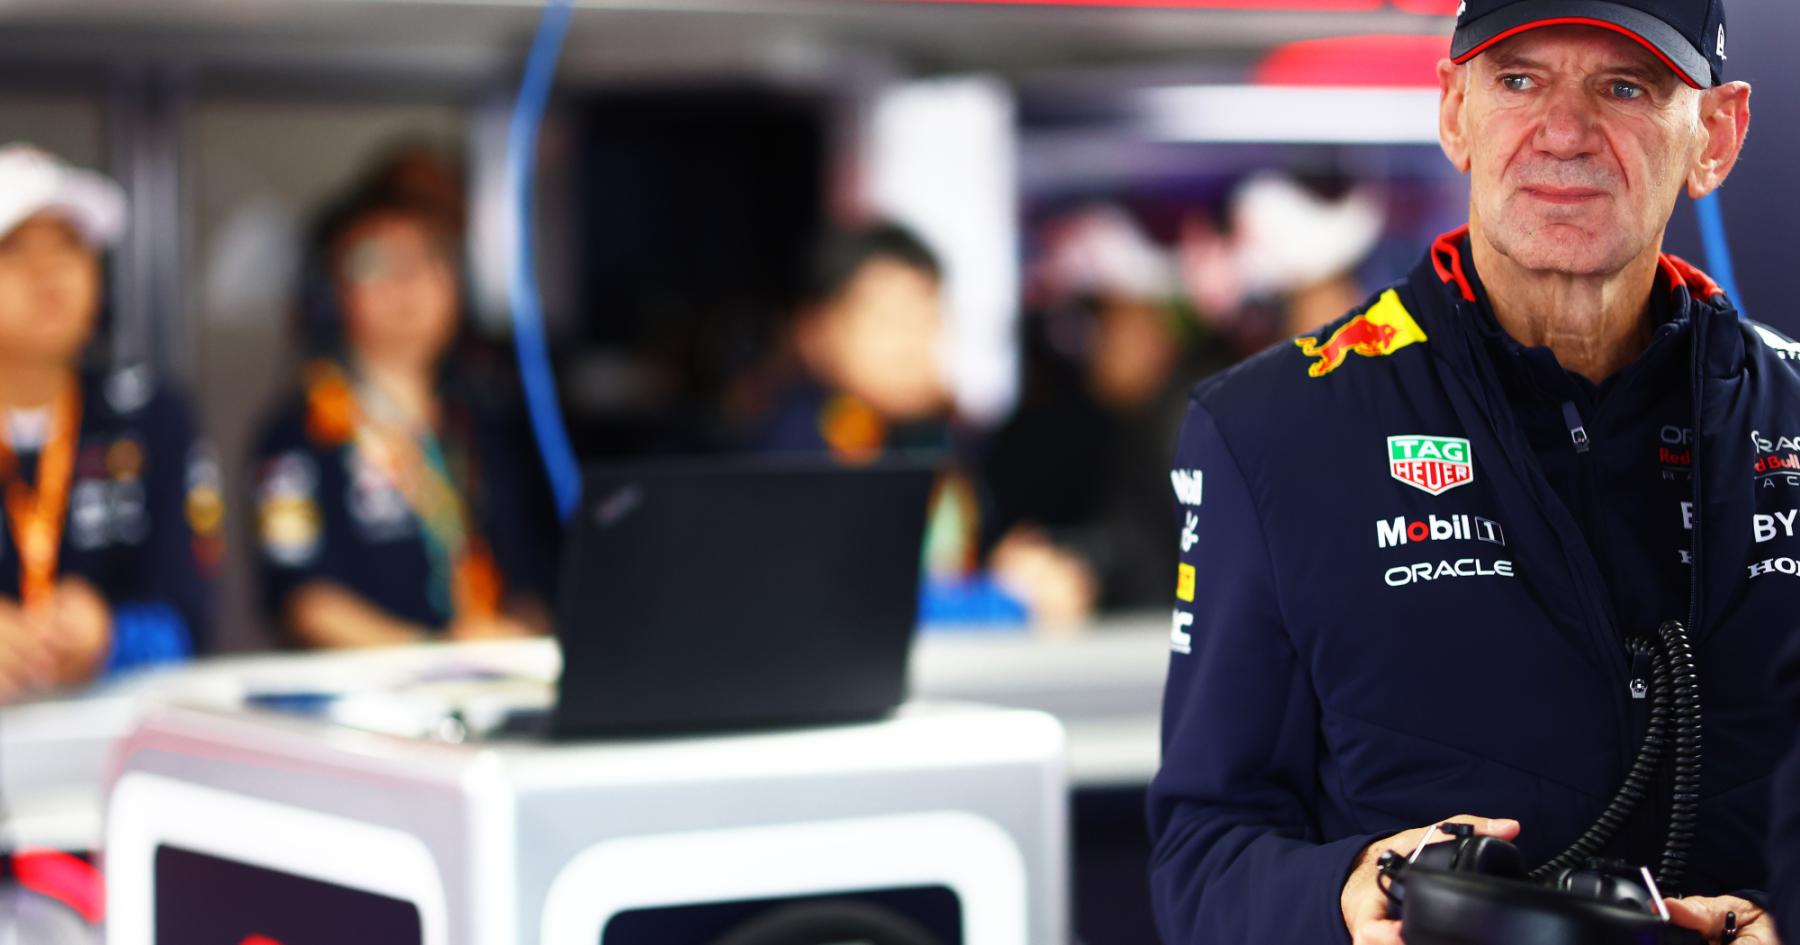 The High-Stakes Warning: The Fallout of Adrian Newey's Potential Departure from Red Bull